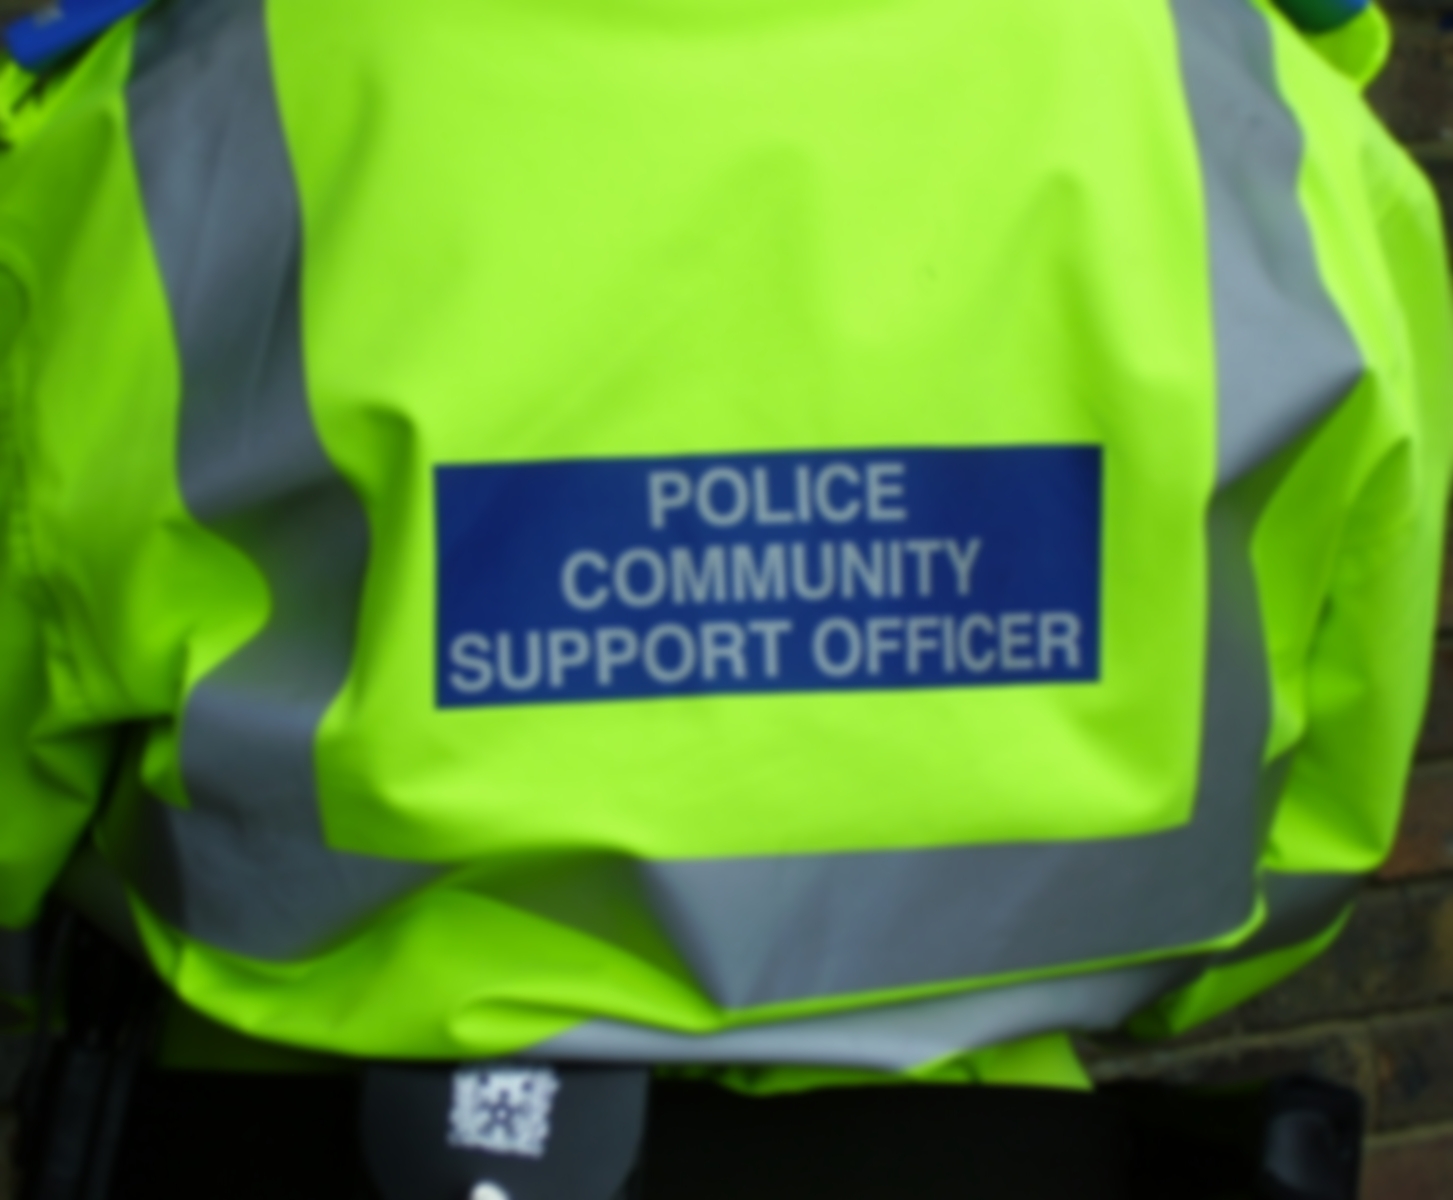 How to Get Police Community Support Officer Jobs in London